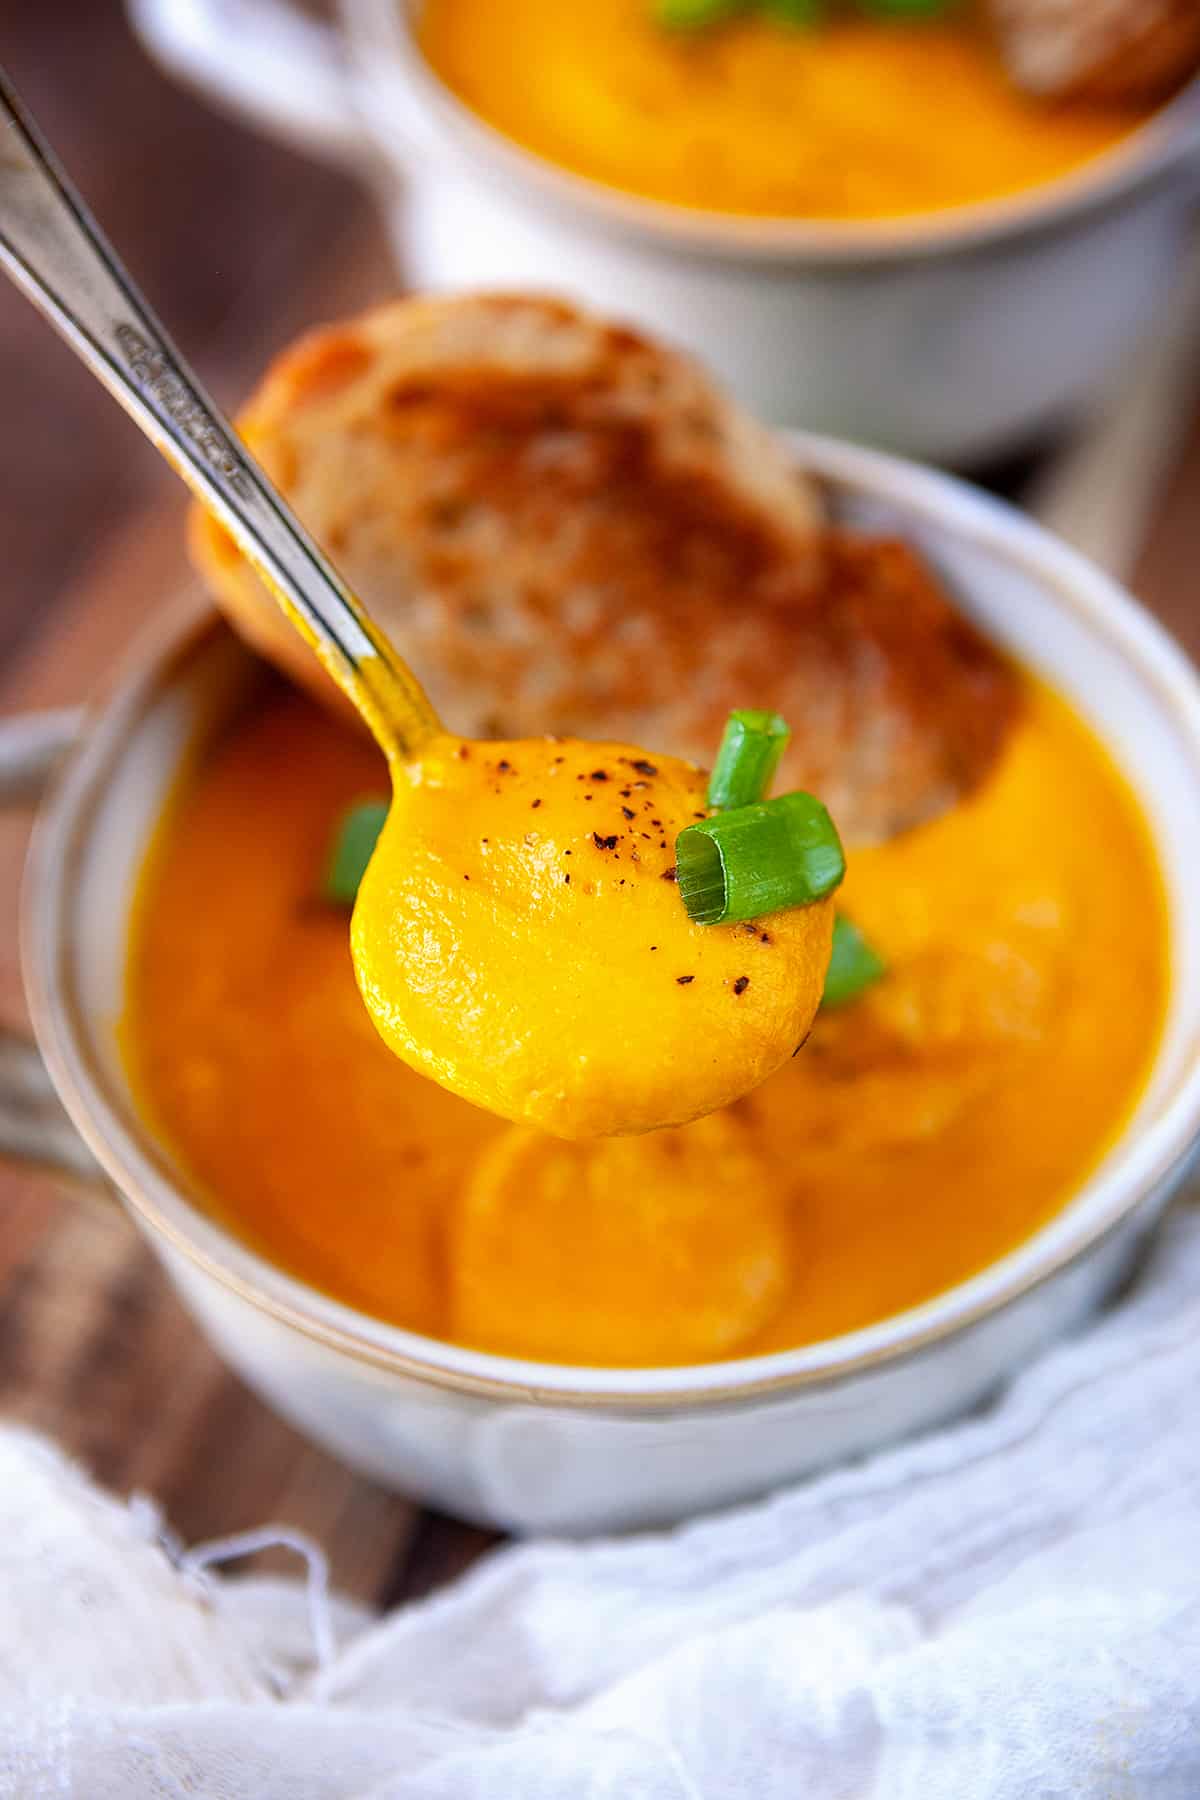 Spoonful of carrot ginger soup